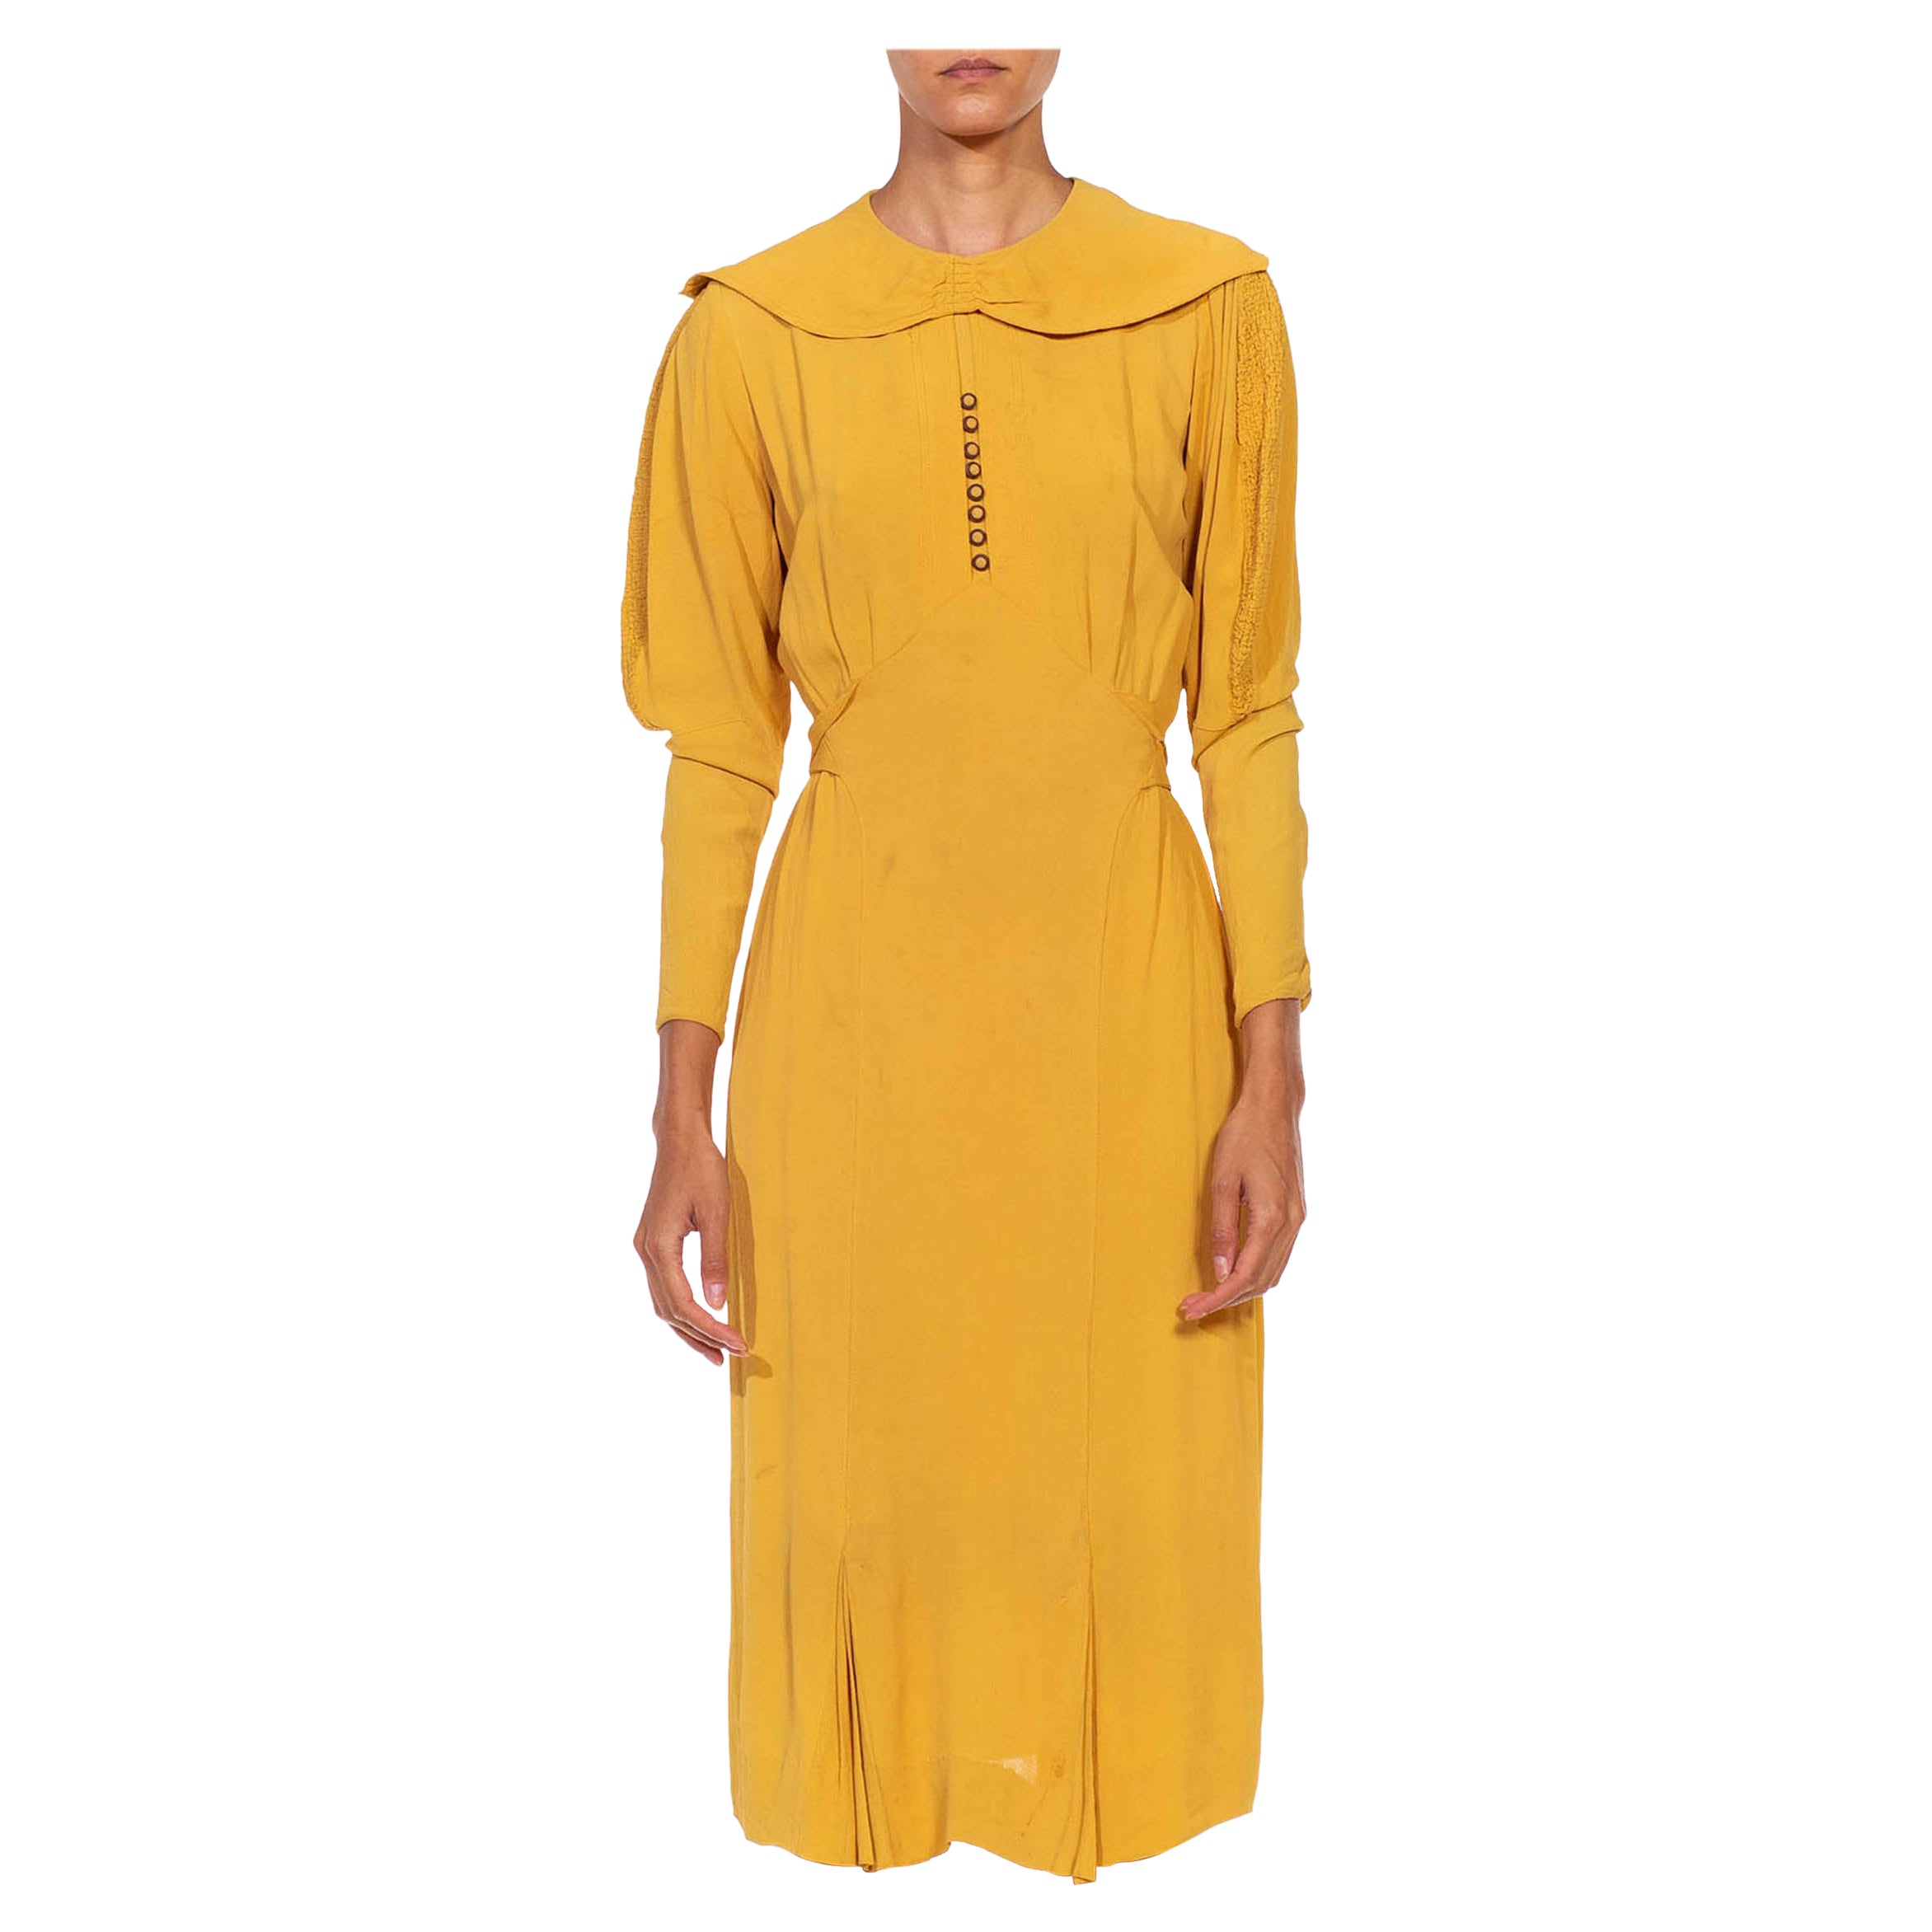 1930S Mustard Yellow Rayon Crepe Caplet Dress With Leg O Mutton Sleeves